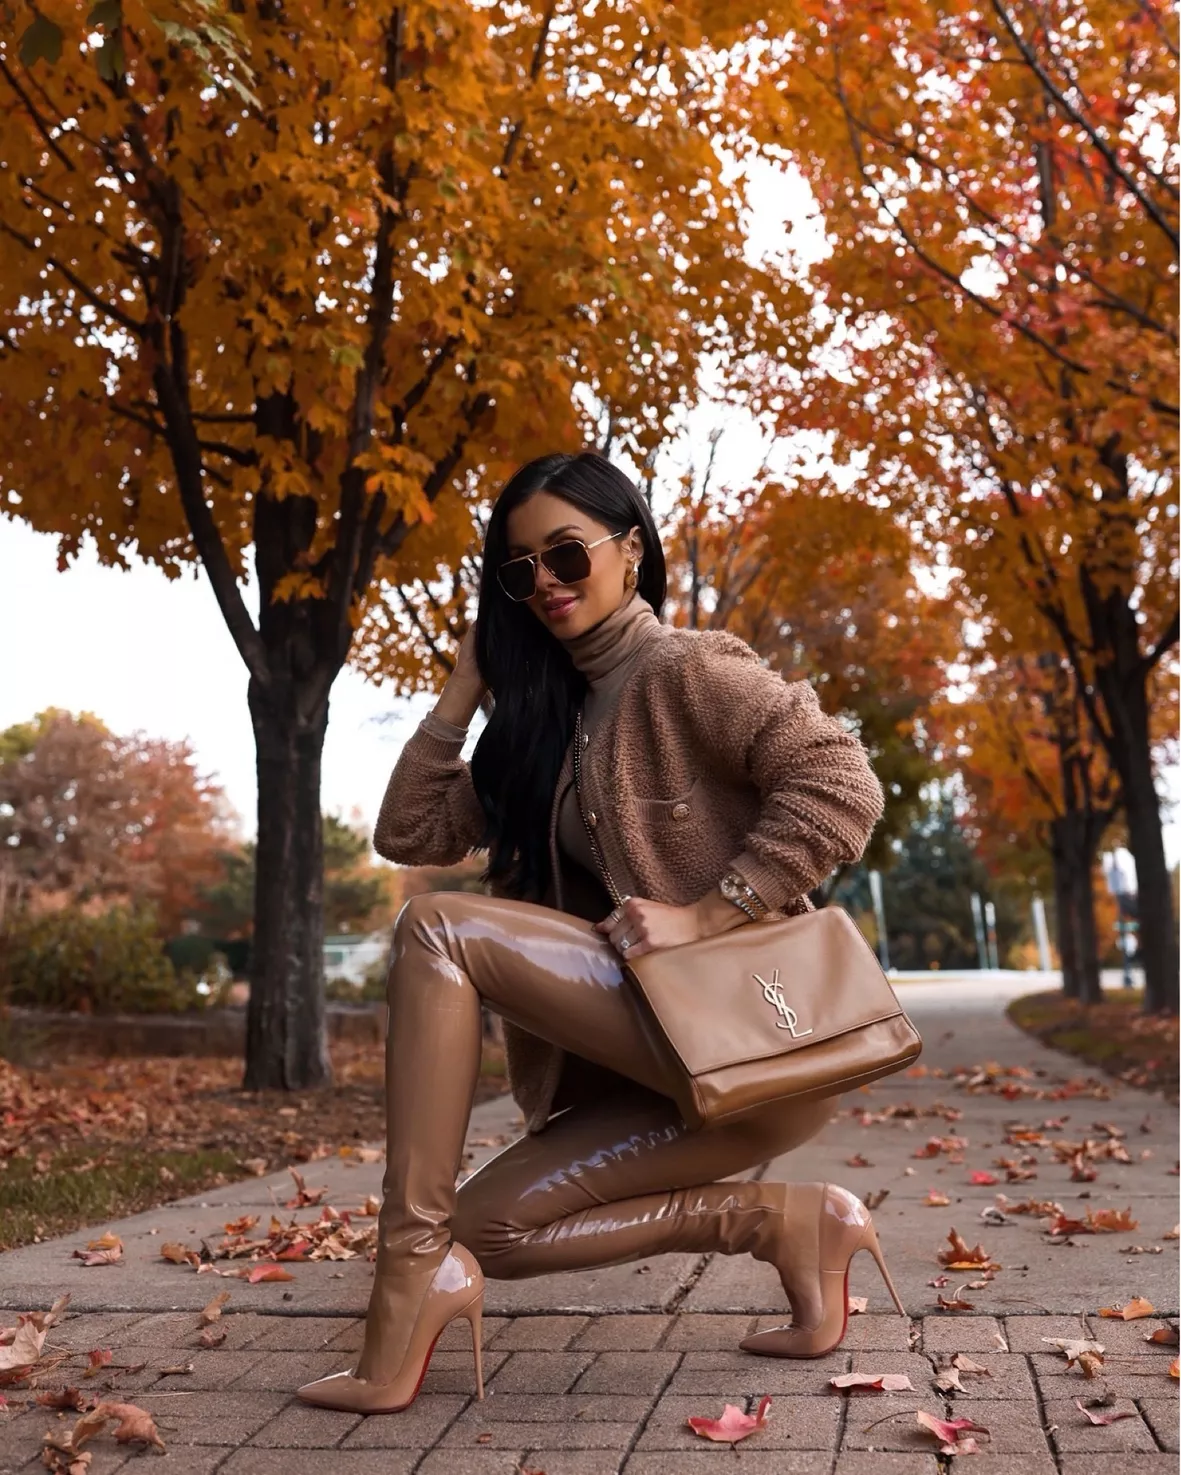 White Sweater and Brown Leather Pants- Mia Mia Mine  Outfits with leggings,  Leather leggings outfit, Leather pants outfit